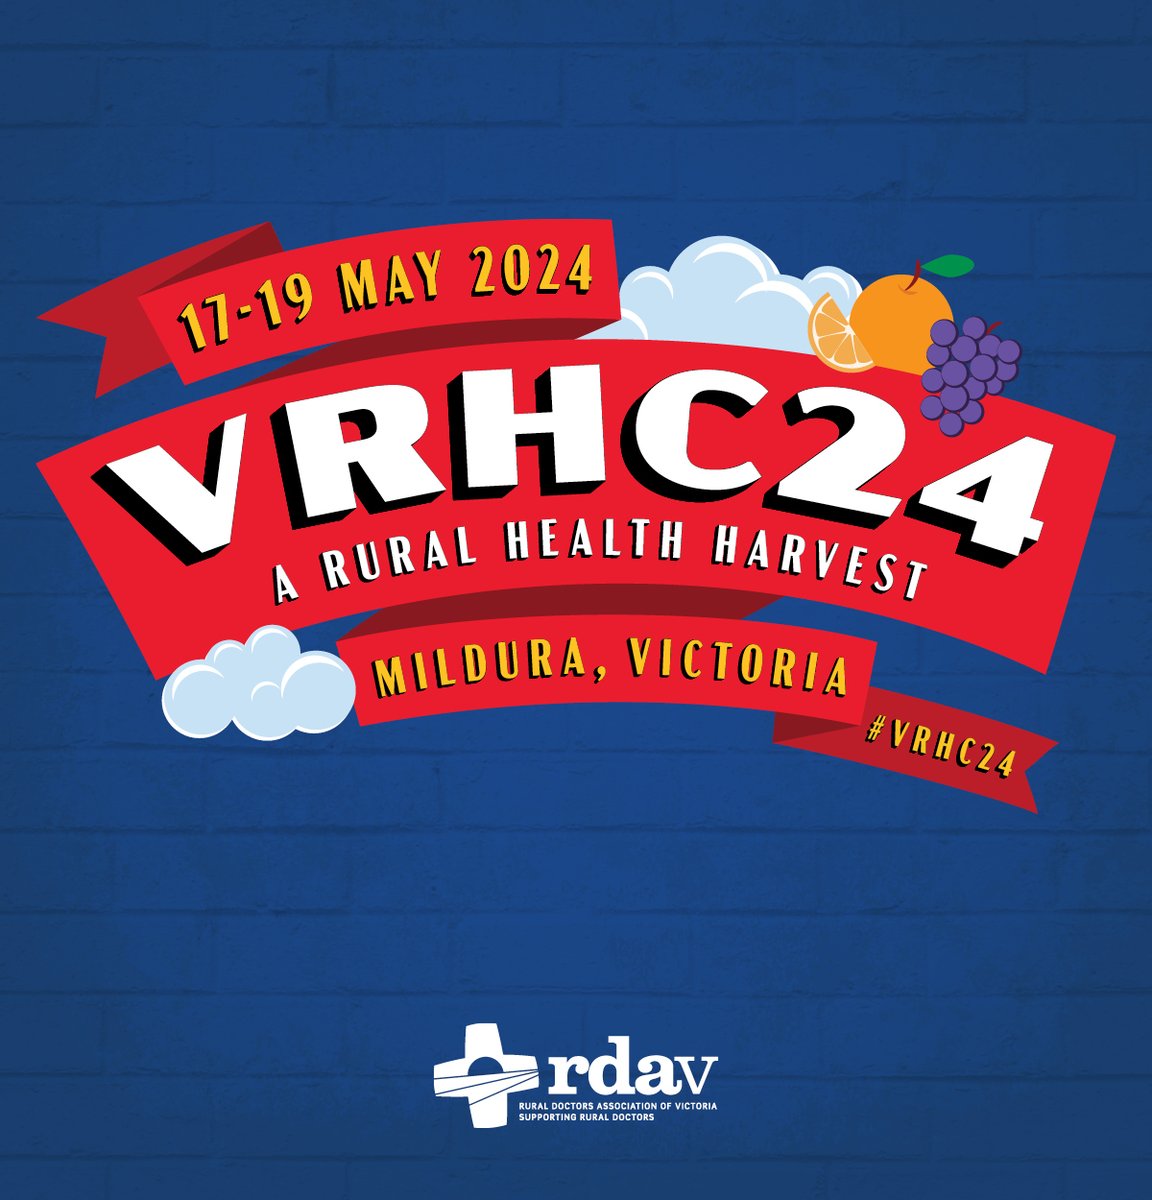 4 weeks until Victorian Rural Health Conference kicks off in Mildura. Lots to enjoy & learn - you really do not want to miss out. Register Now bit.ly/476kxt4 Highlight - Gala Dinner on Sat 18 May 2024, thanks to the support of our partner @ChiesiGroup Australia.